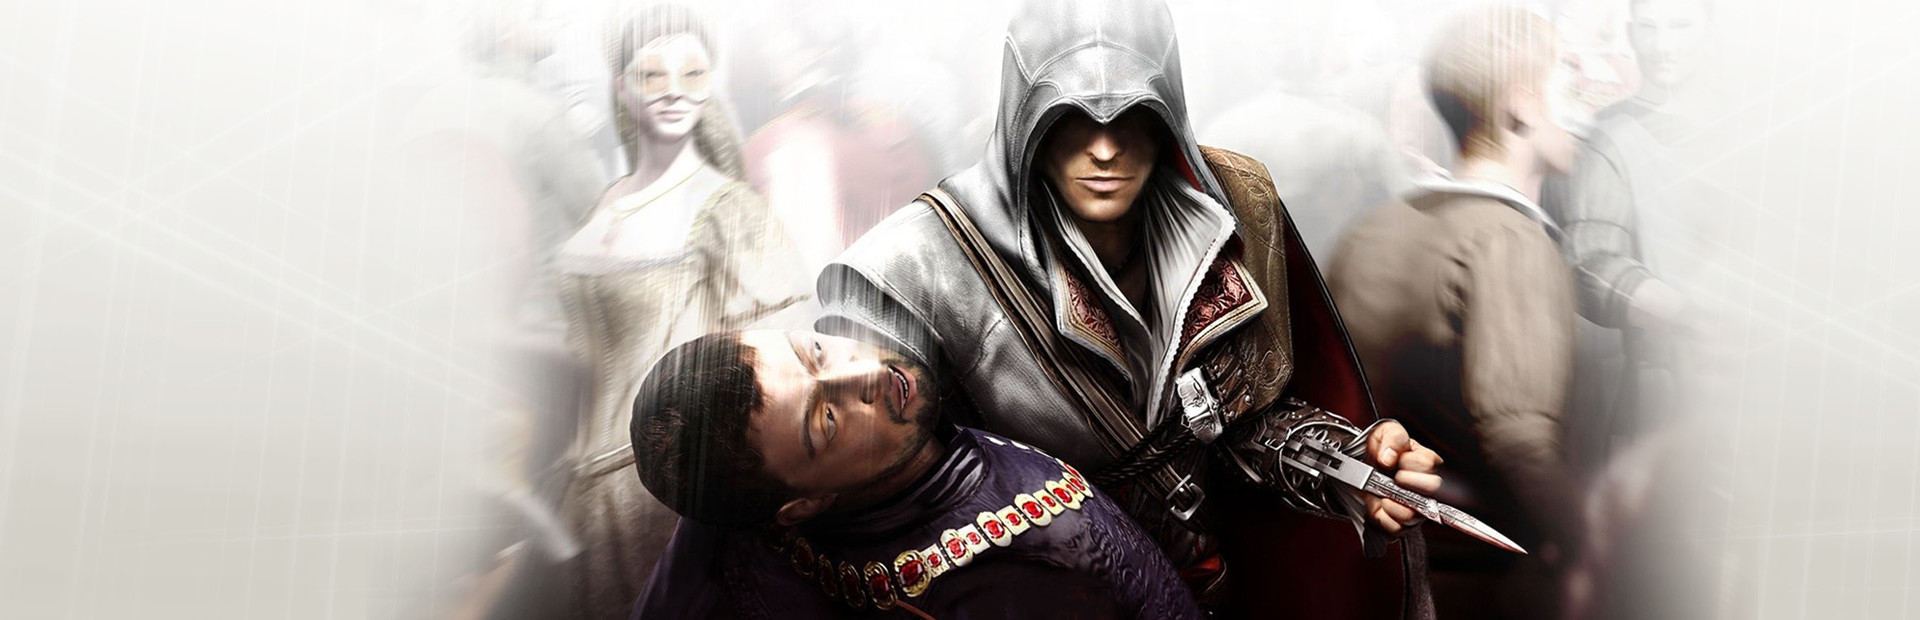 Assassin's Creed 2 cover image